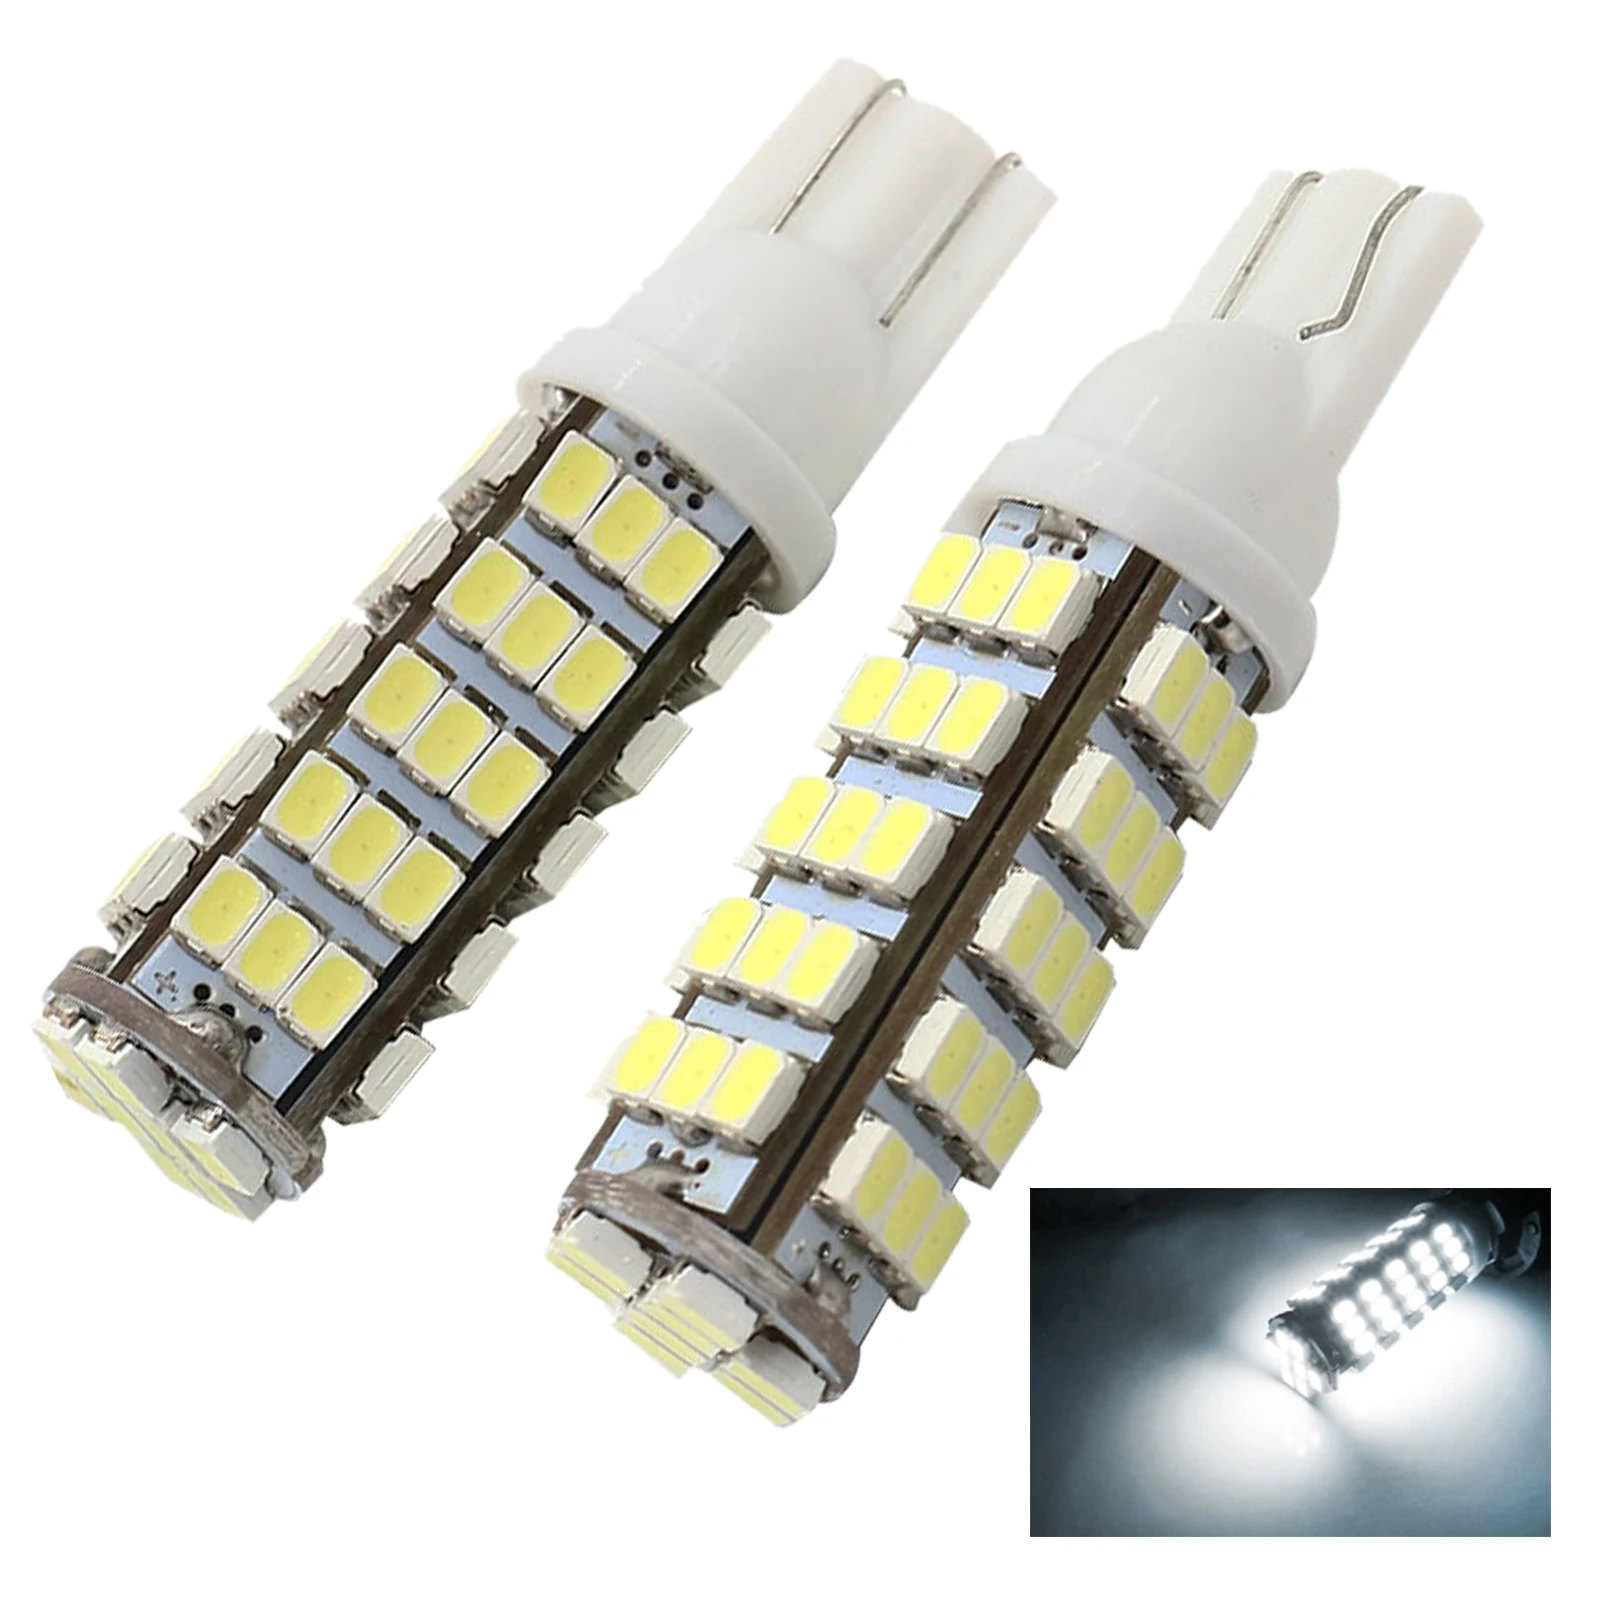 

2 Pcs White T10 W5W 68 LED 194 501 1206 SMD Car Styling Interior Lights Clearance Lamp Marker Lamps Auto Bulbs DC 12V